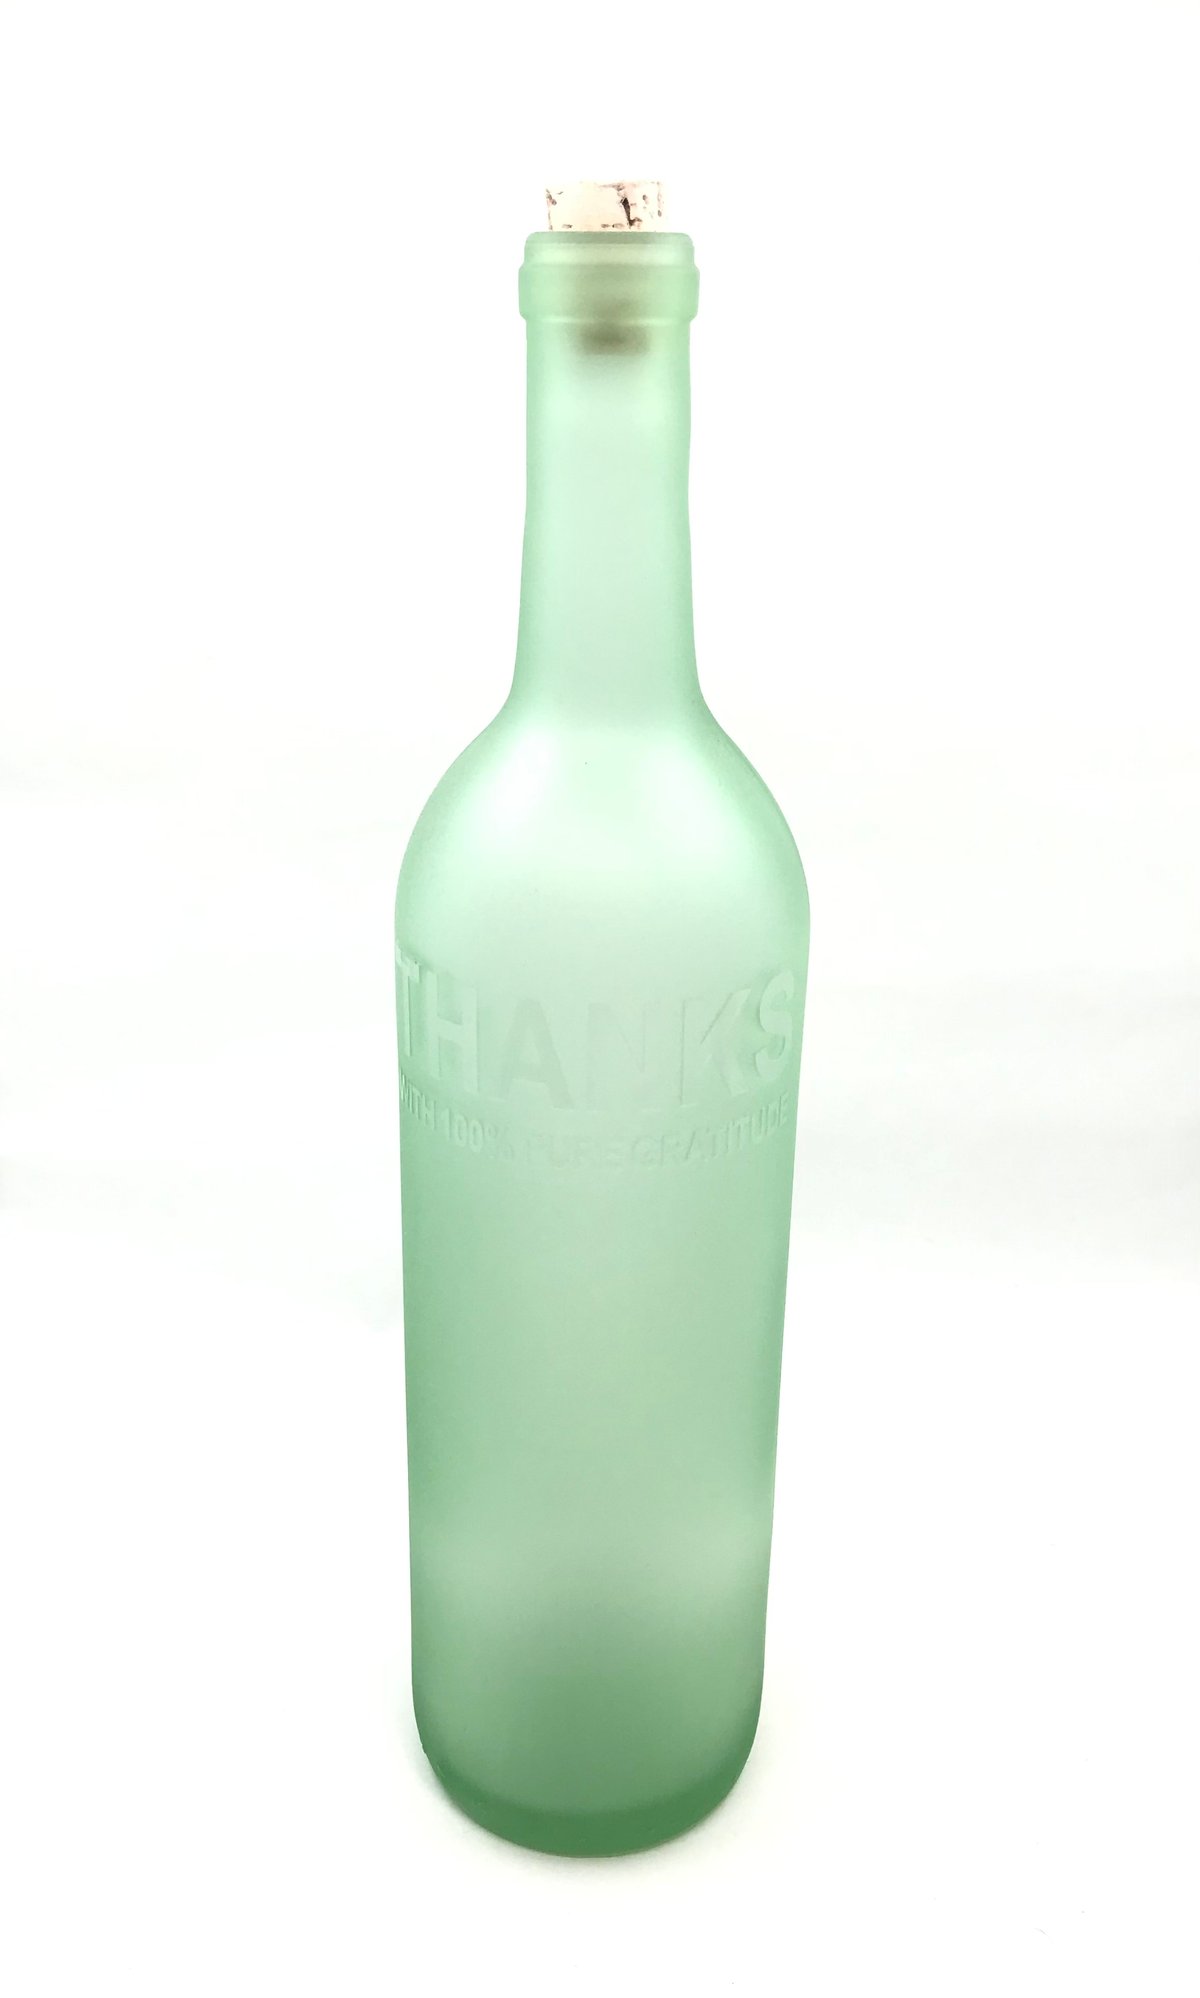  *** 30% Off*** Glass Poets Bottles by Jeff Crandall